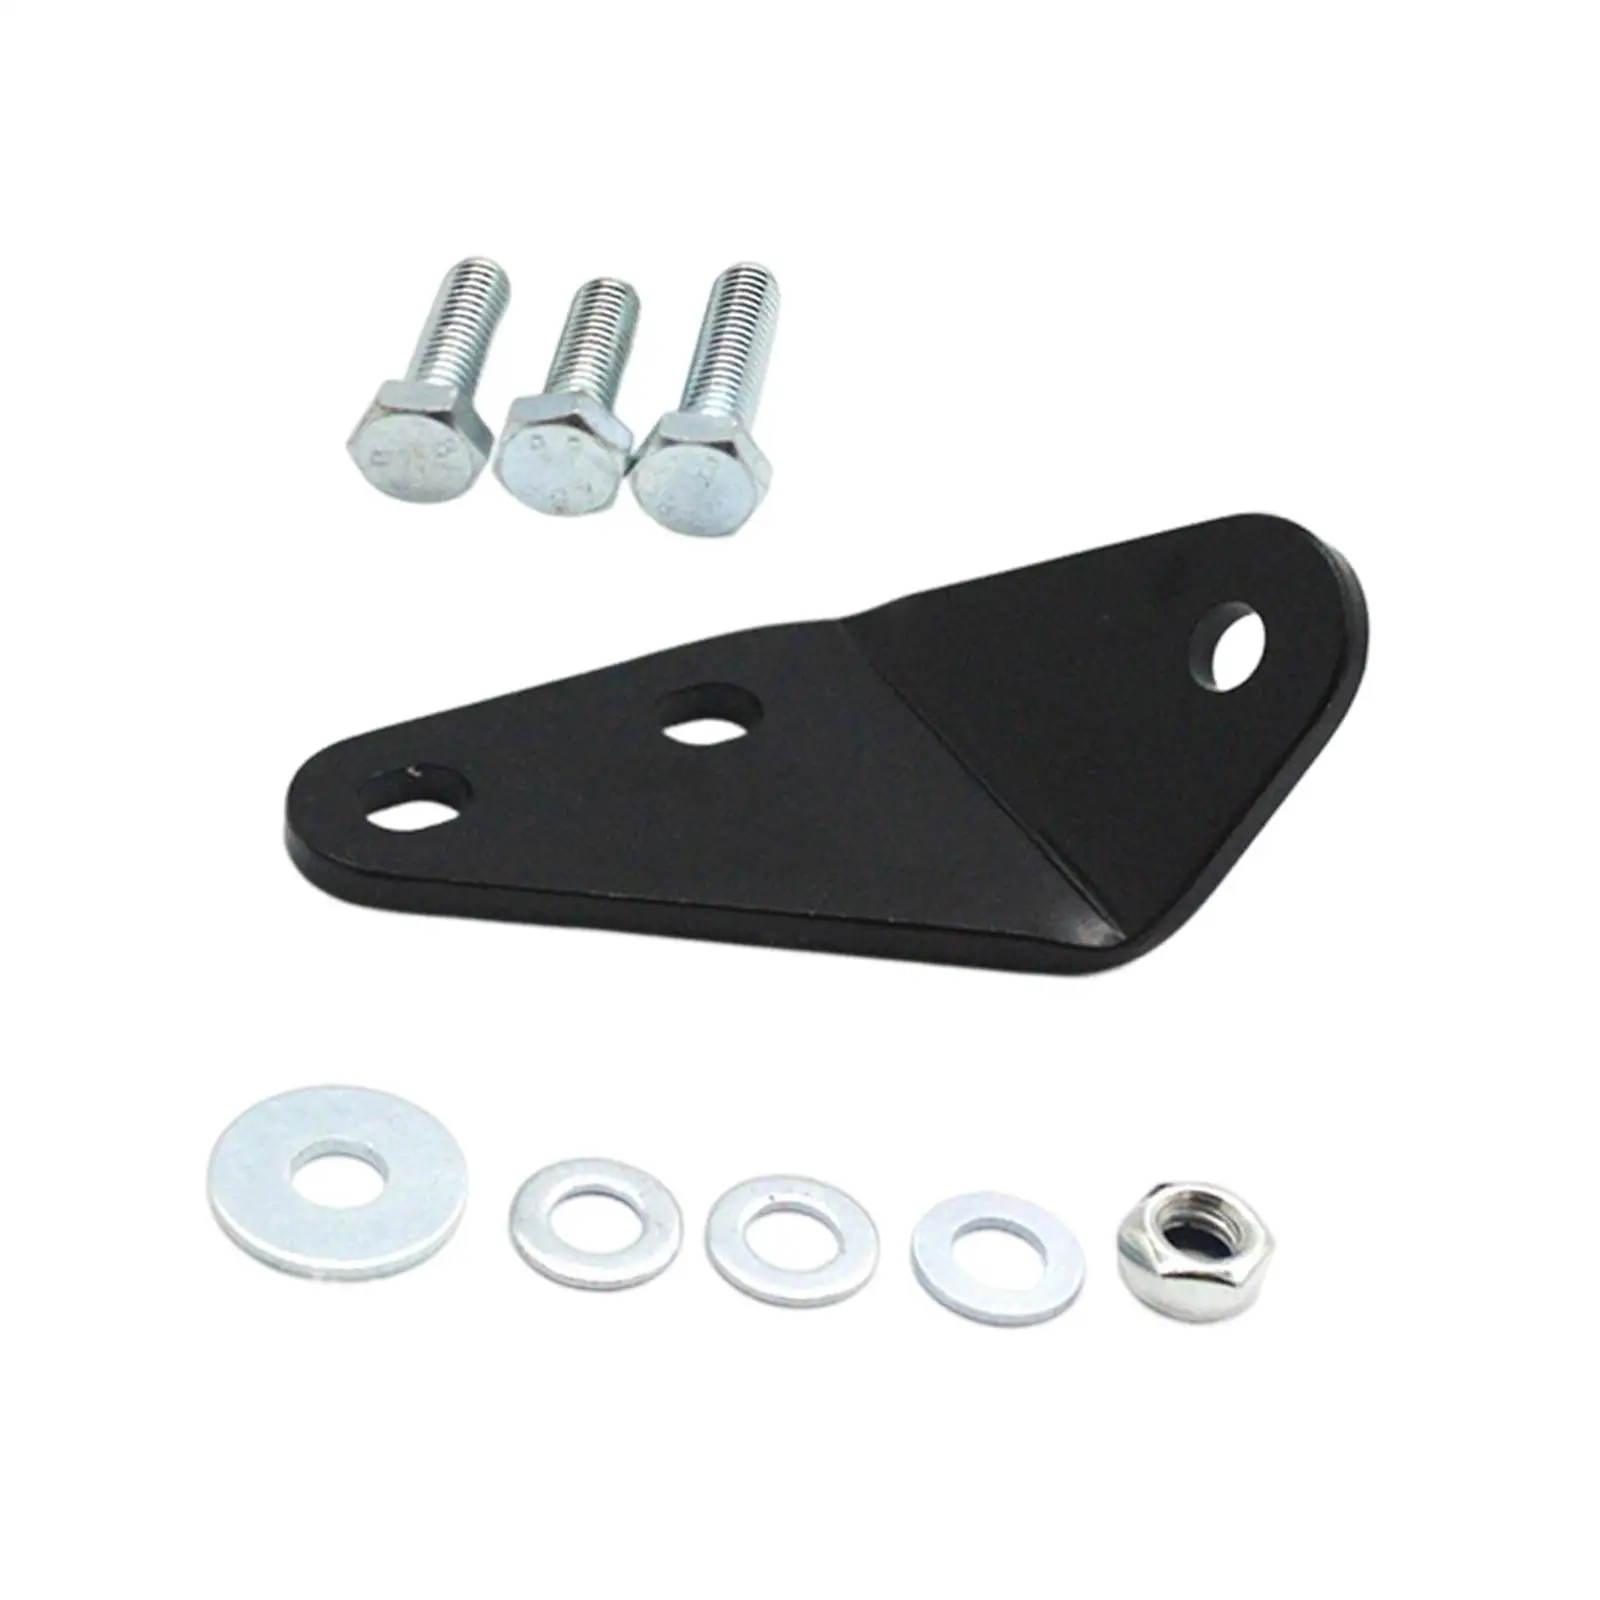 Clutch Pedal Bracket Metal Easy Installation High Performance Replace for VW T4 Transporter Caravelle Multivan Accessories